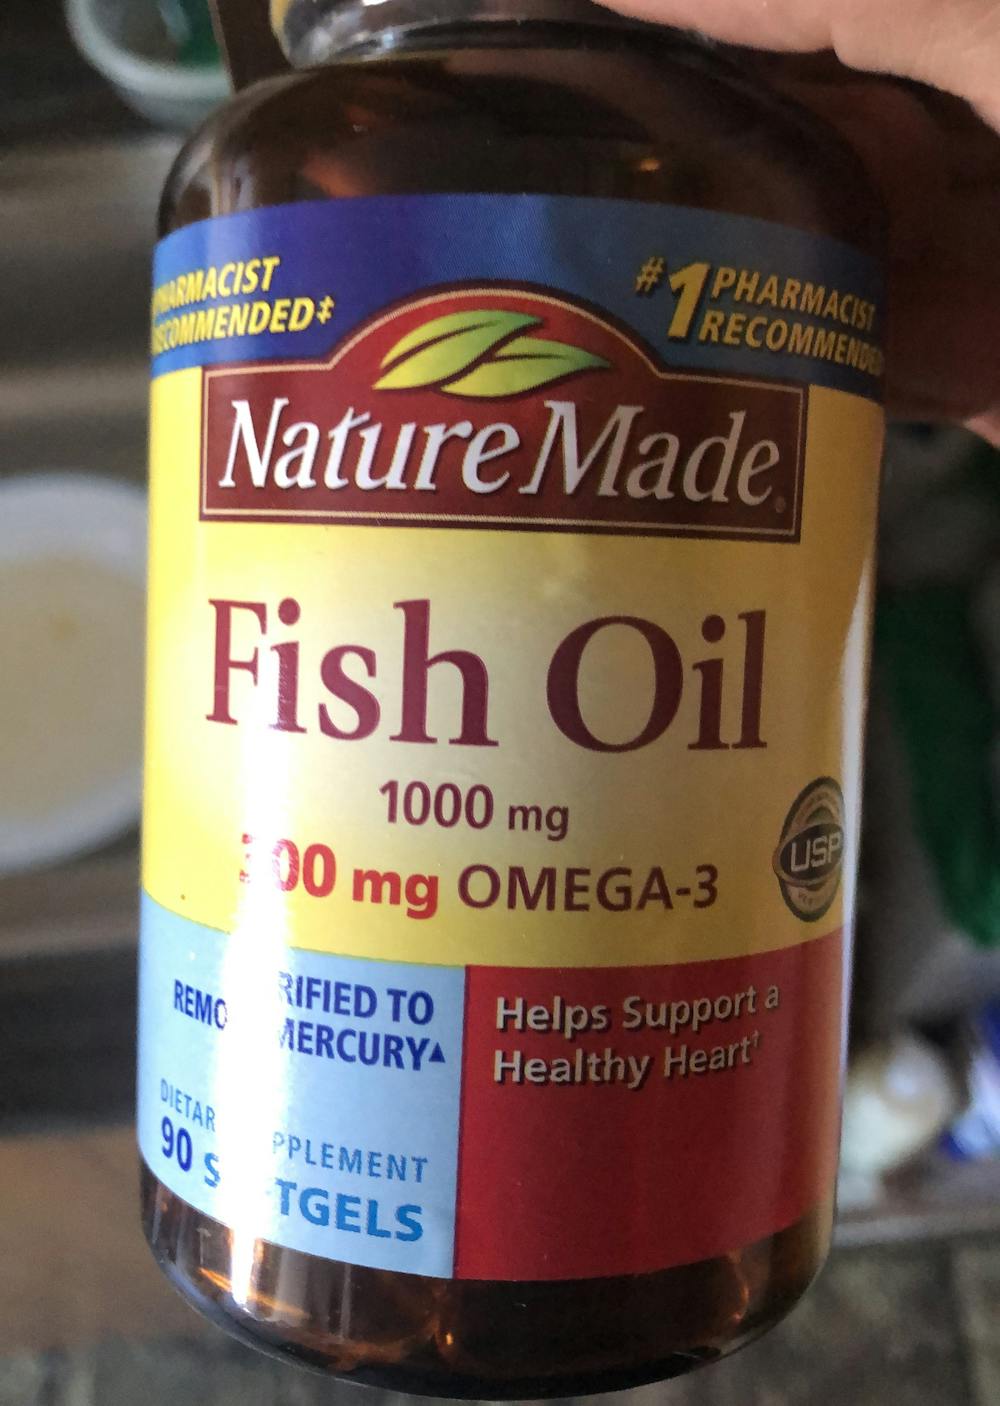 Fish oil, Nature made